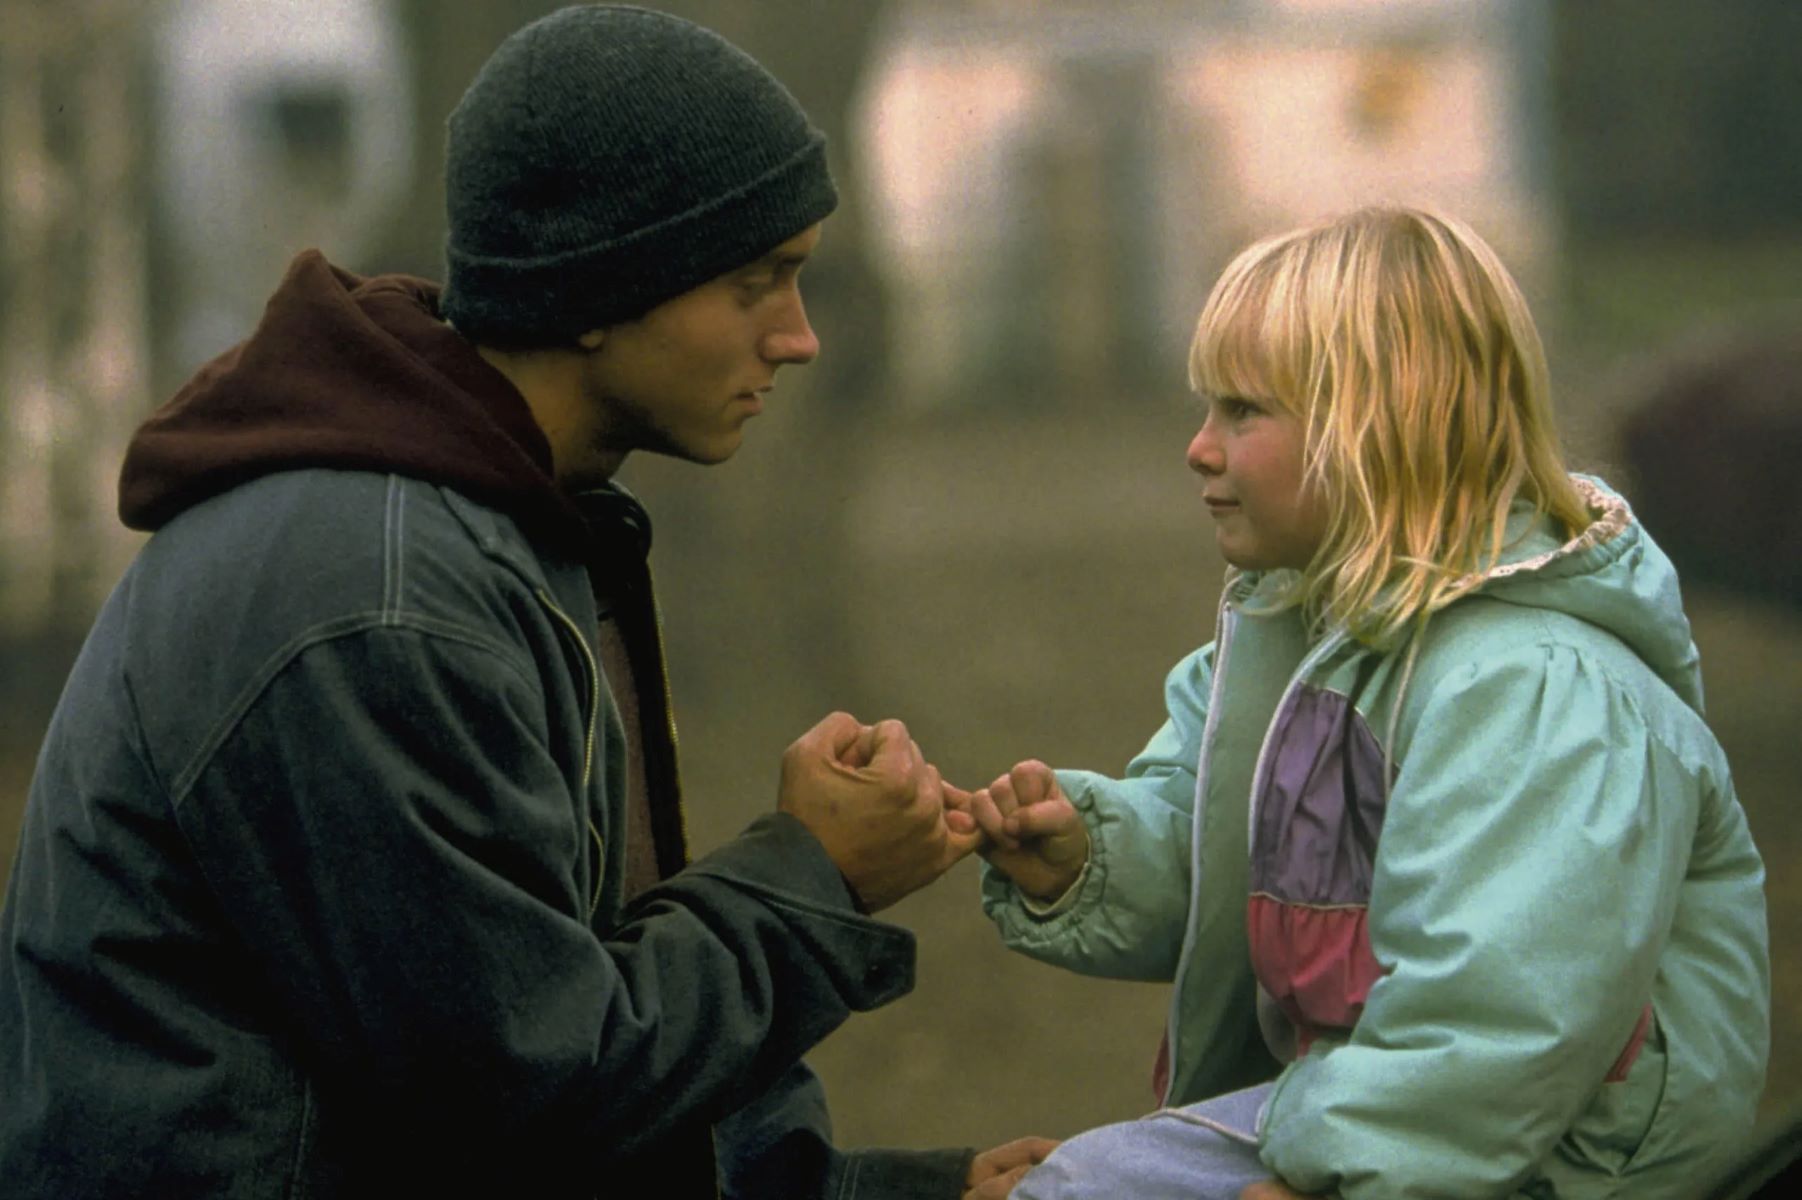 The Surprising Role Lily Played In Eminem's 8 Mile!